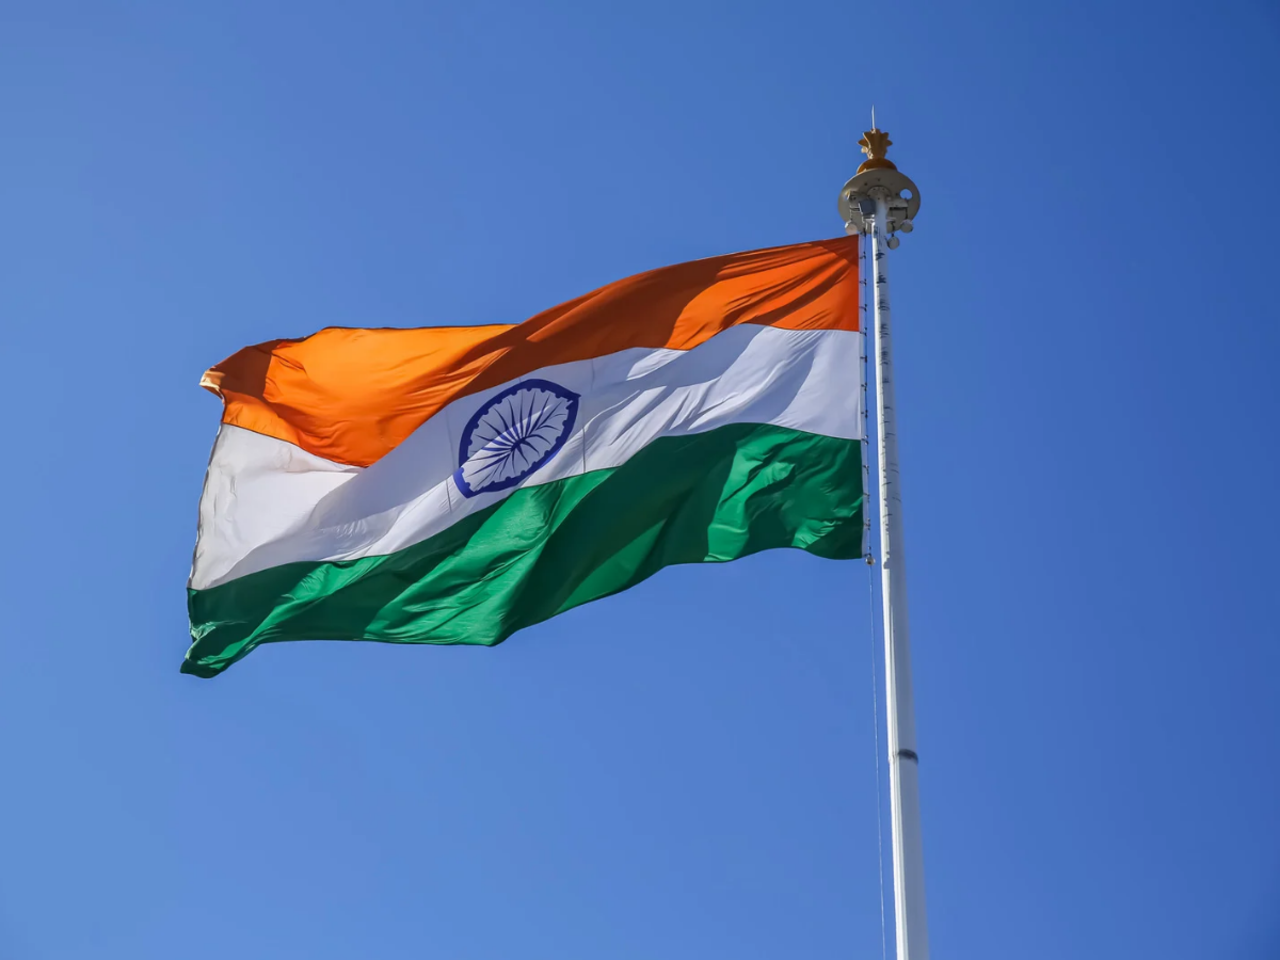 Armed Forces Flag Day 2022 in India: Know Date, History